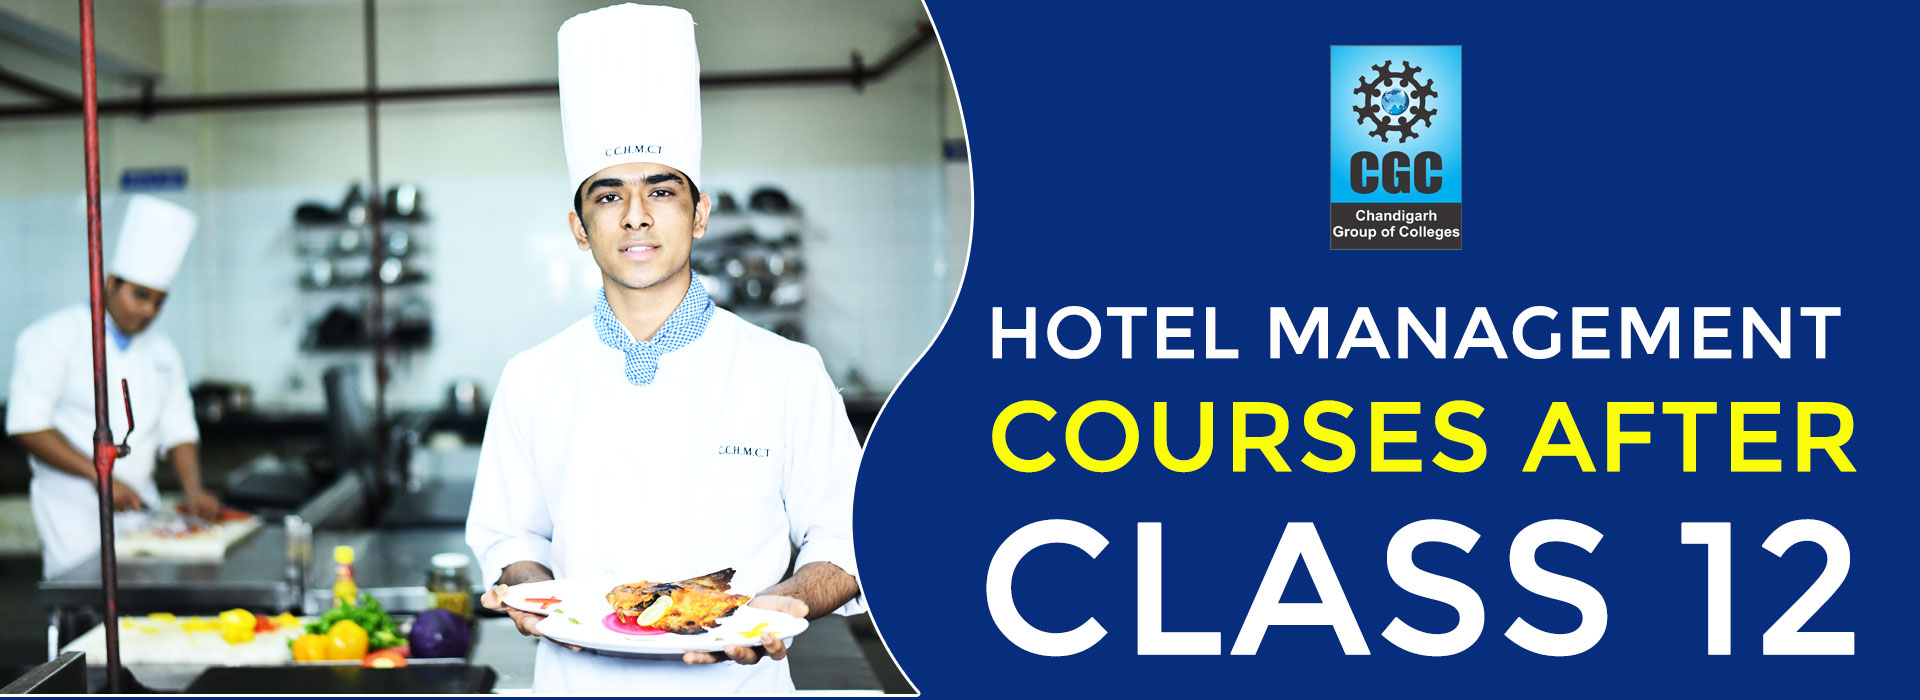 Hotel Management Courses after Class 12 